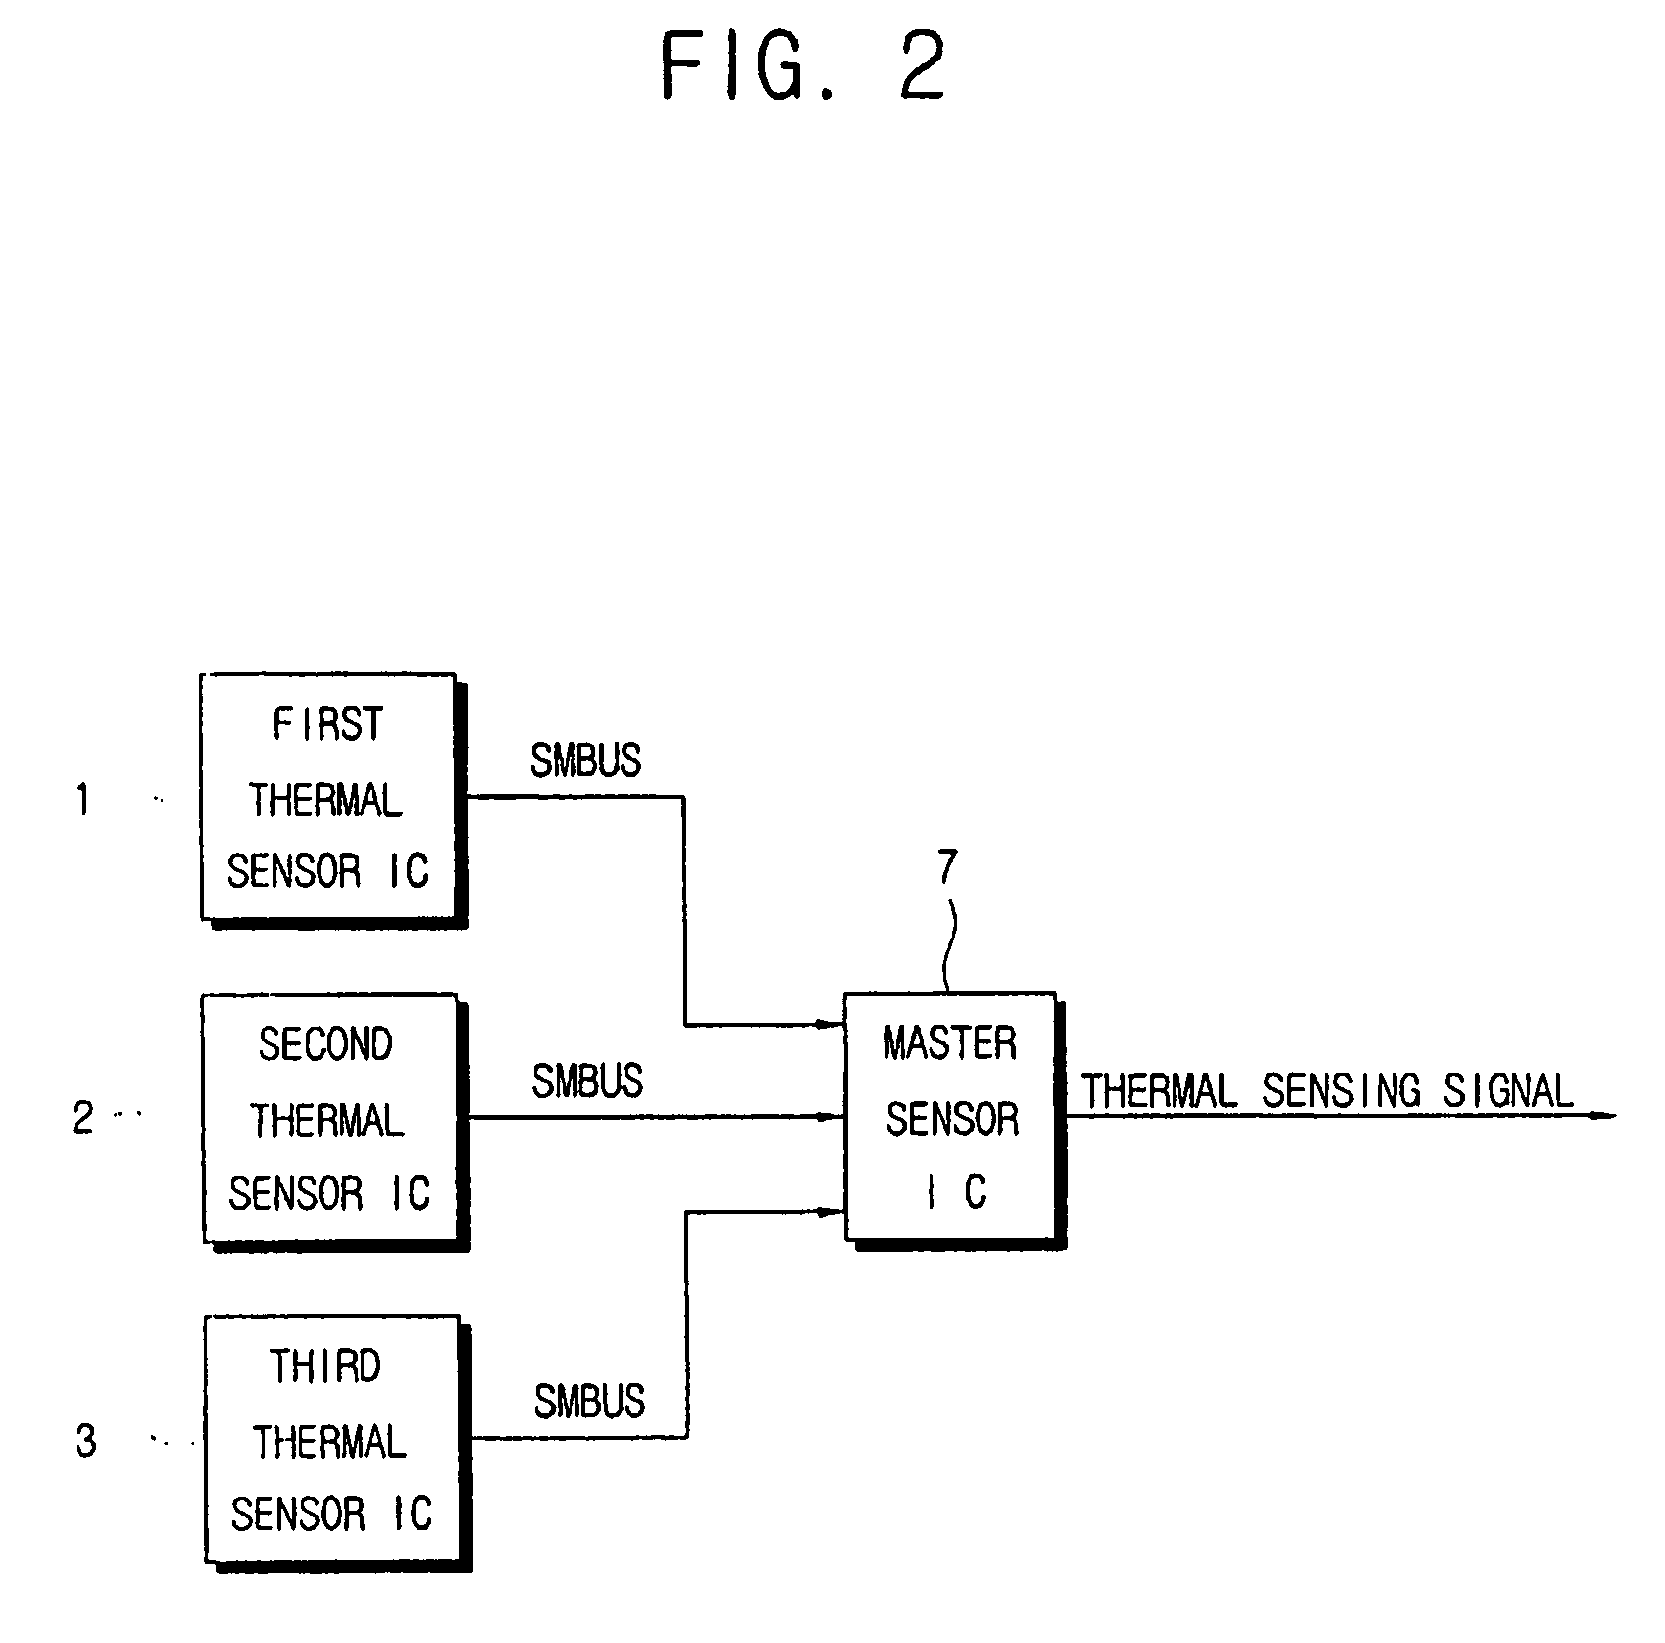 Thermal sensing apparatus and computer system incorporating the same